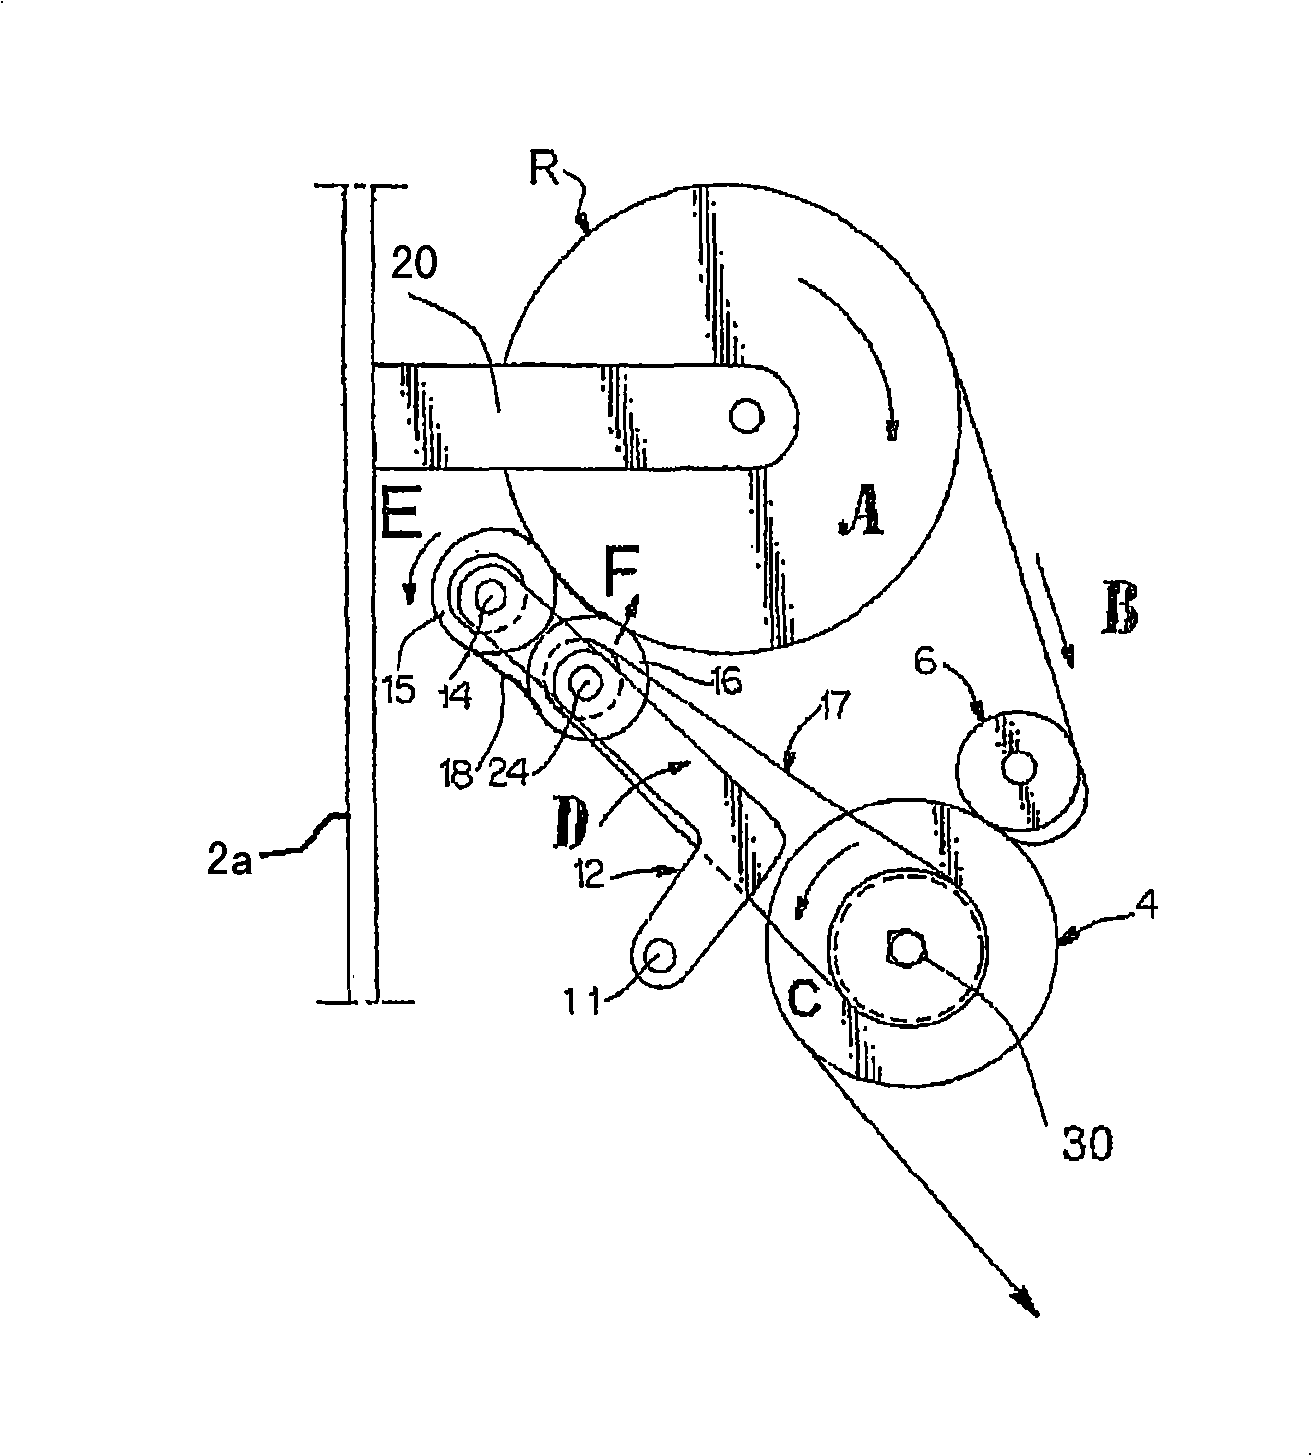 Supply roll surface drive for a dispensing apparatus